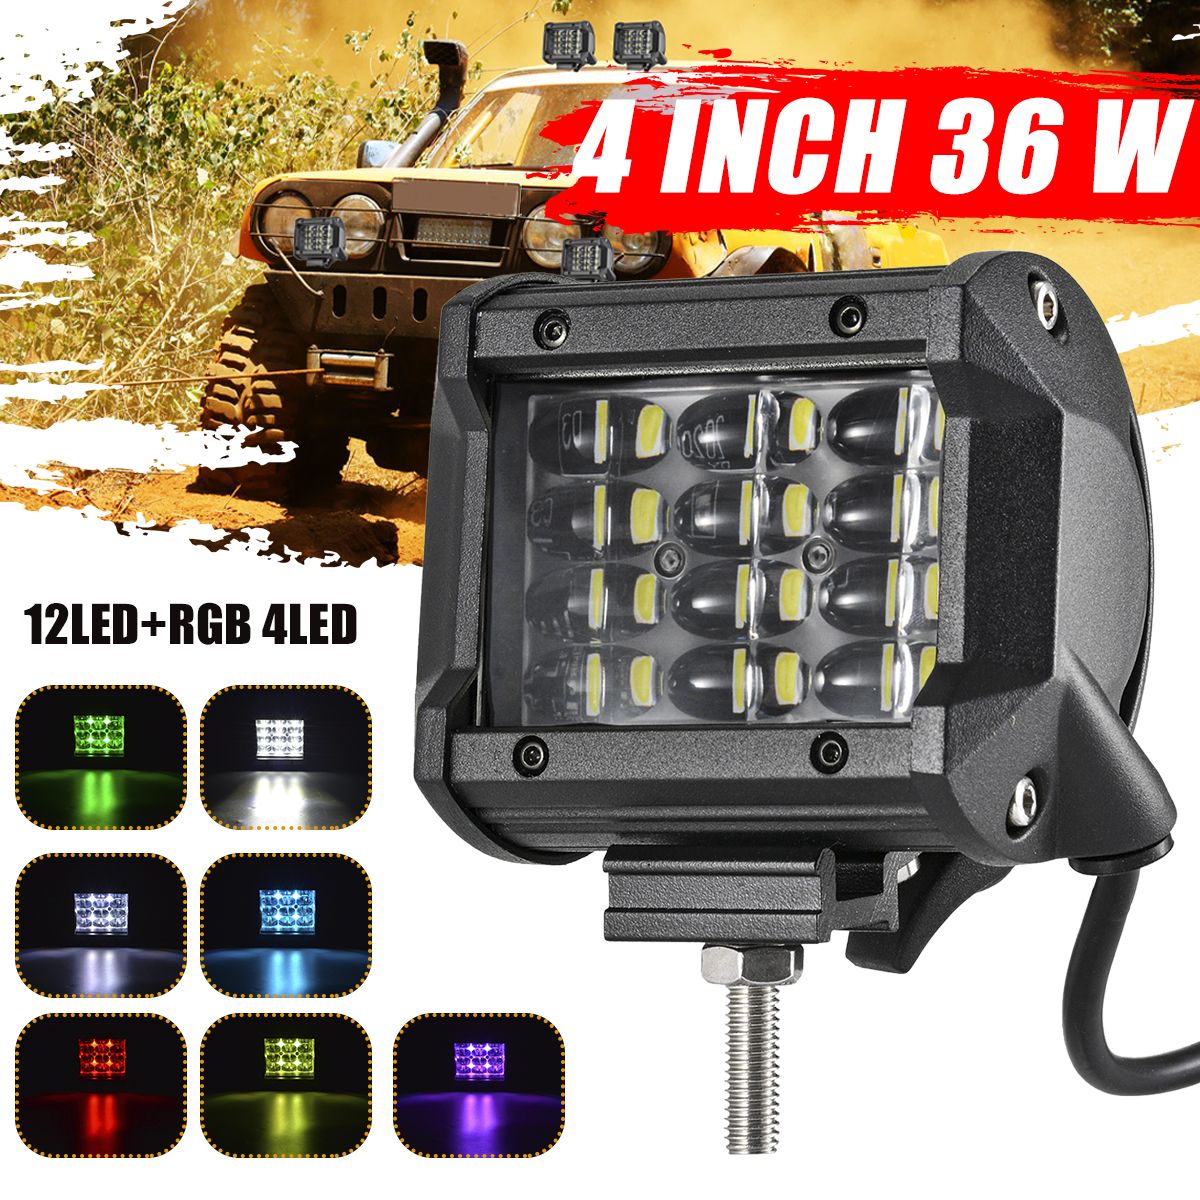 36W-4inch-RGB-LED-Work-Light-Bar-Atmosphere-Lamp-4WD-SUV-Truck-UTE-Offroad-ATV-1704048